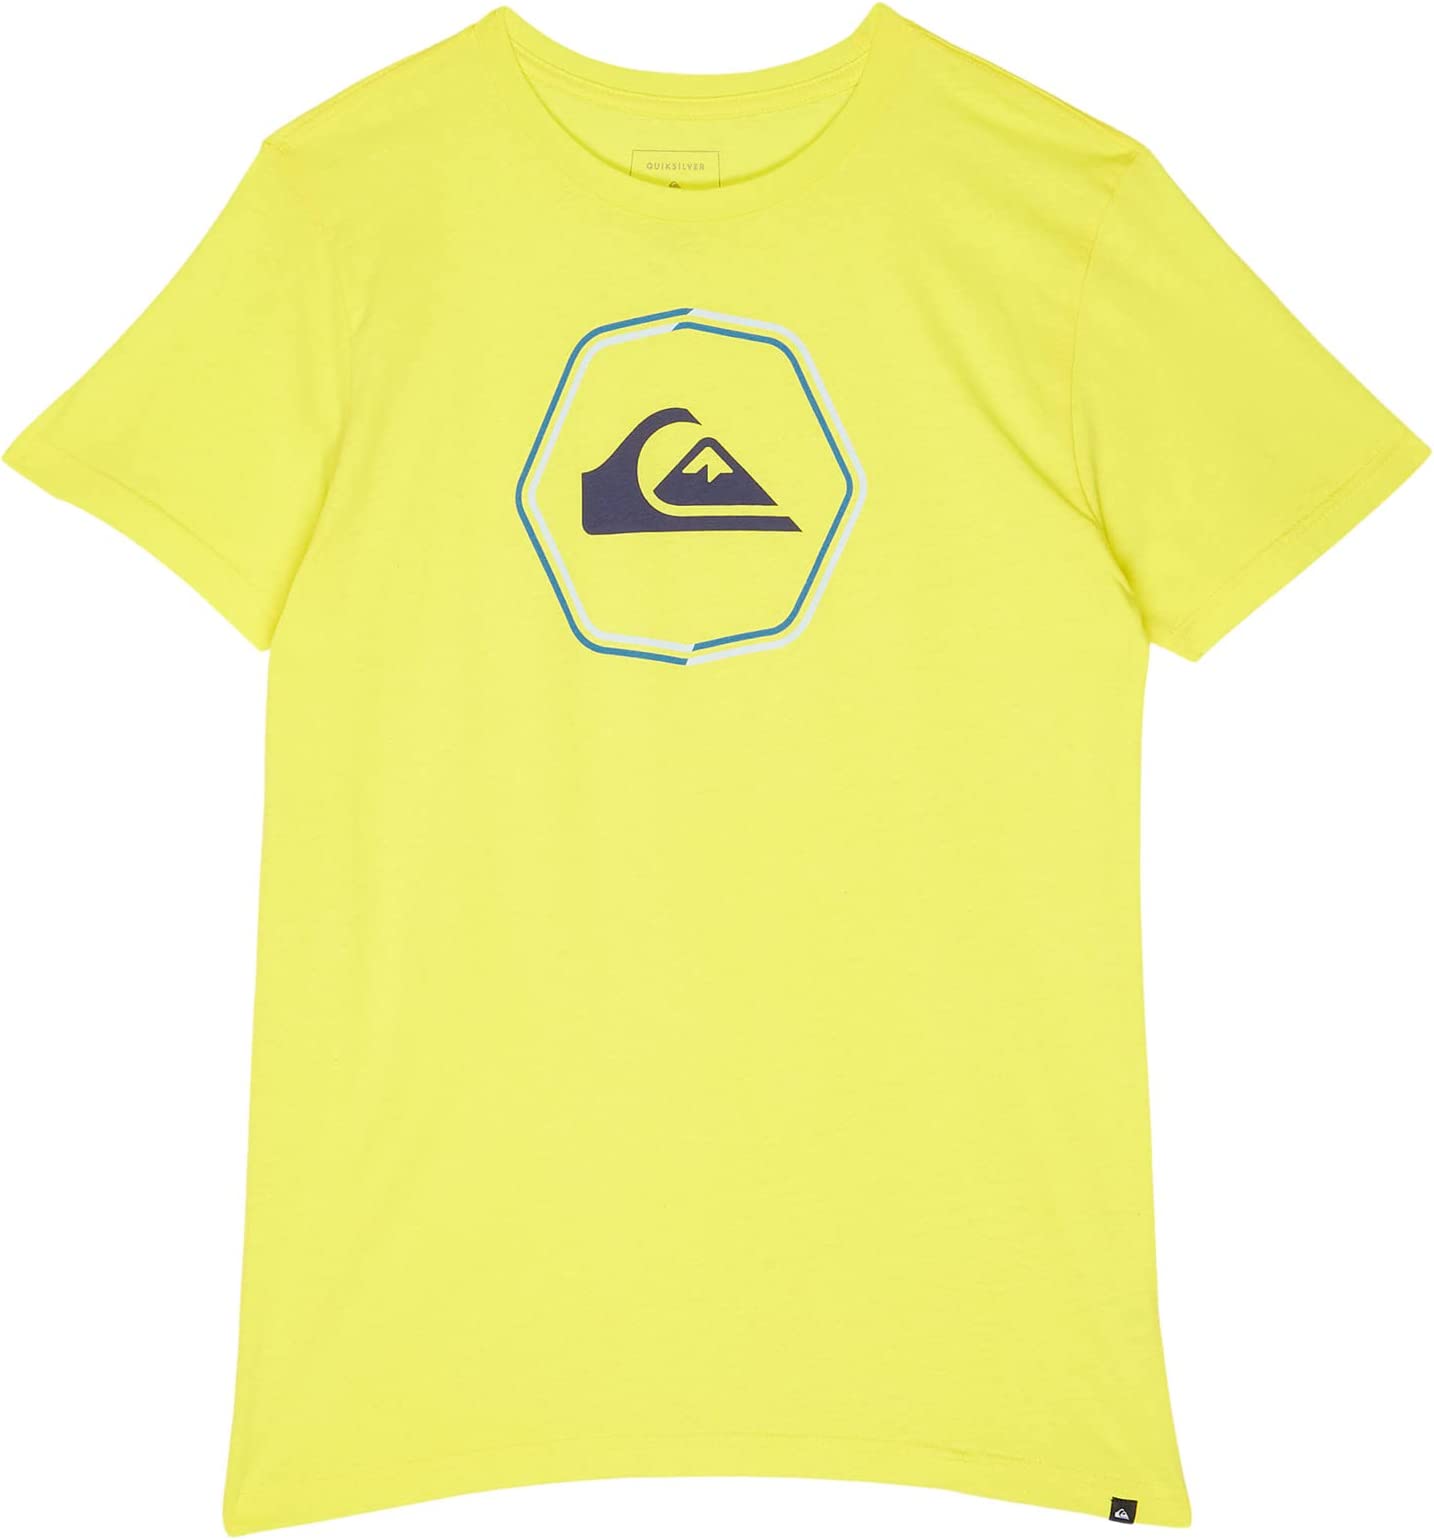 Quiksilver Kids ○ Lines sale Kids) on (Big Free Delivery | Tee Thin quiksurfshop.com